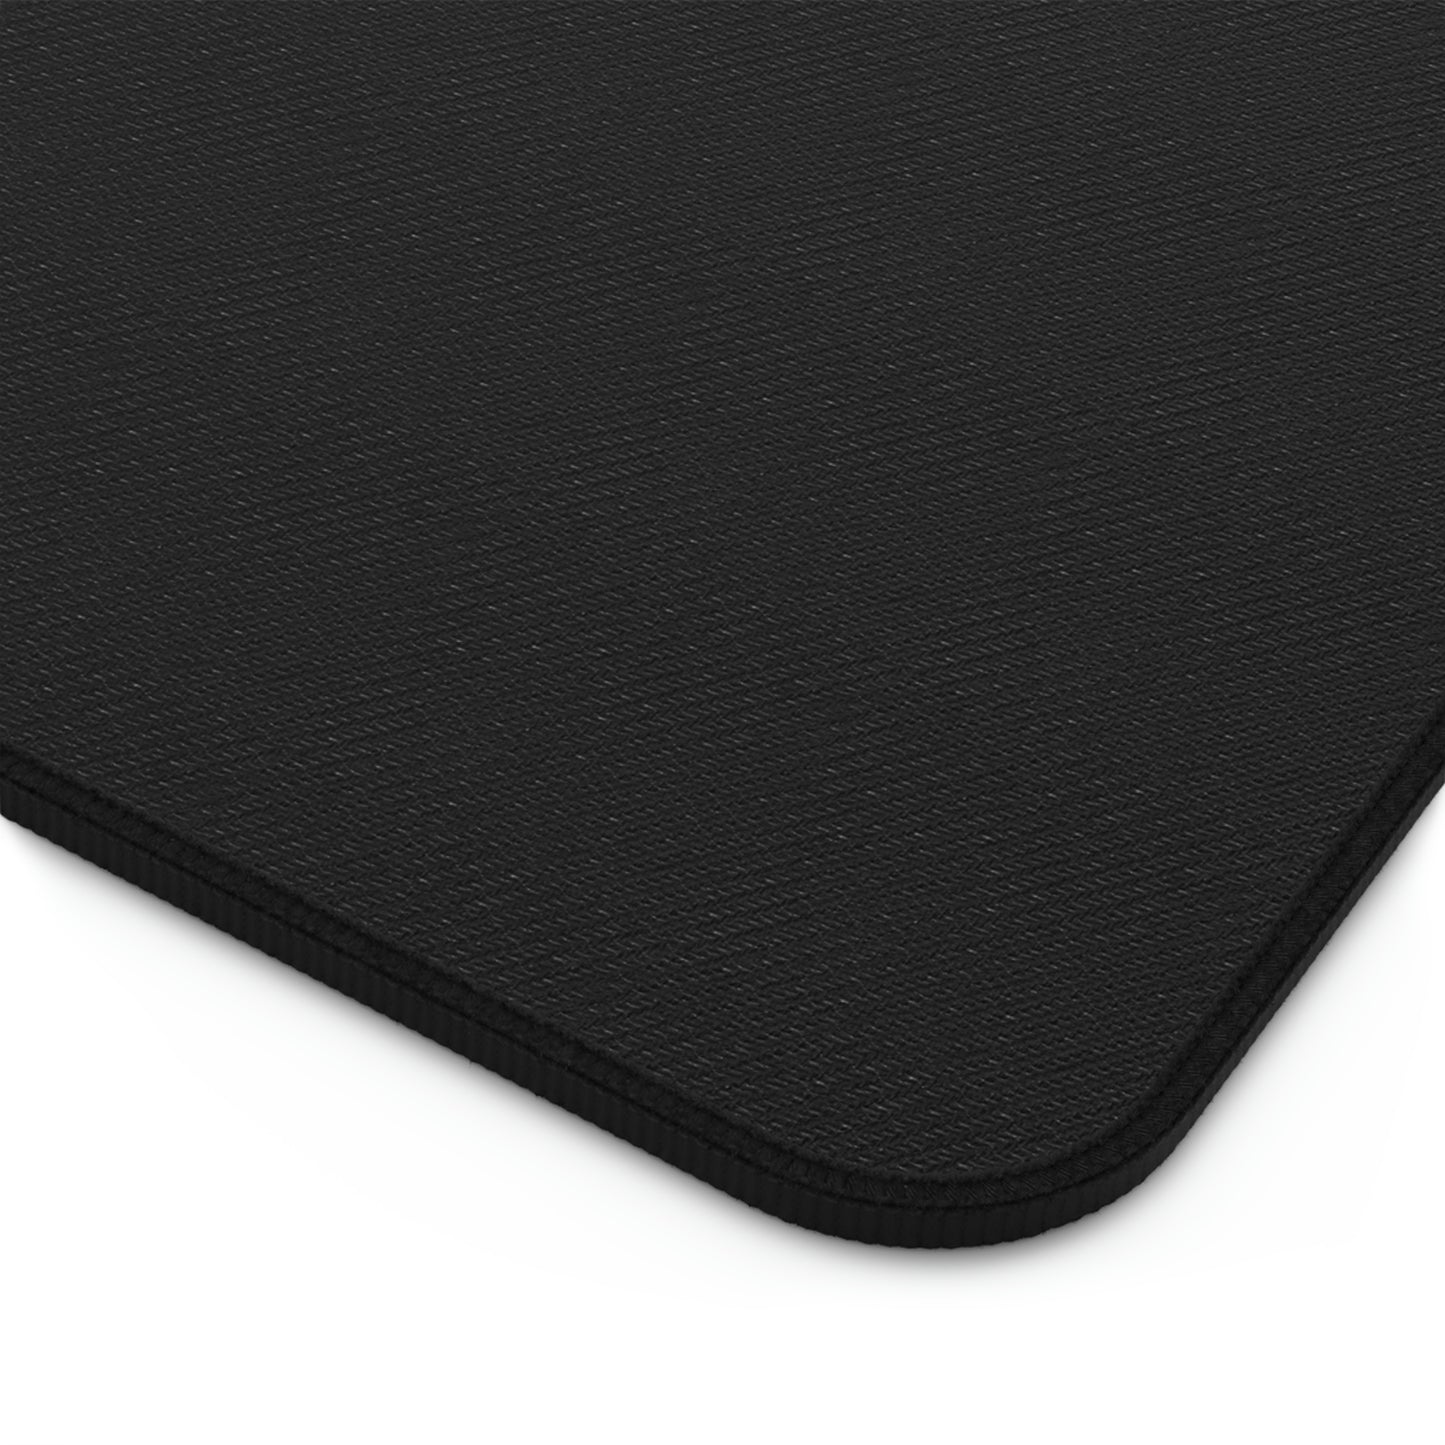 The black rubber bottom of a gray topographic desk mat.